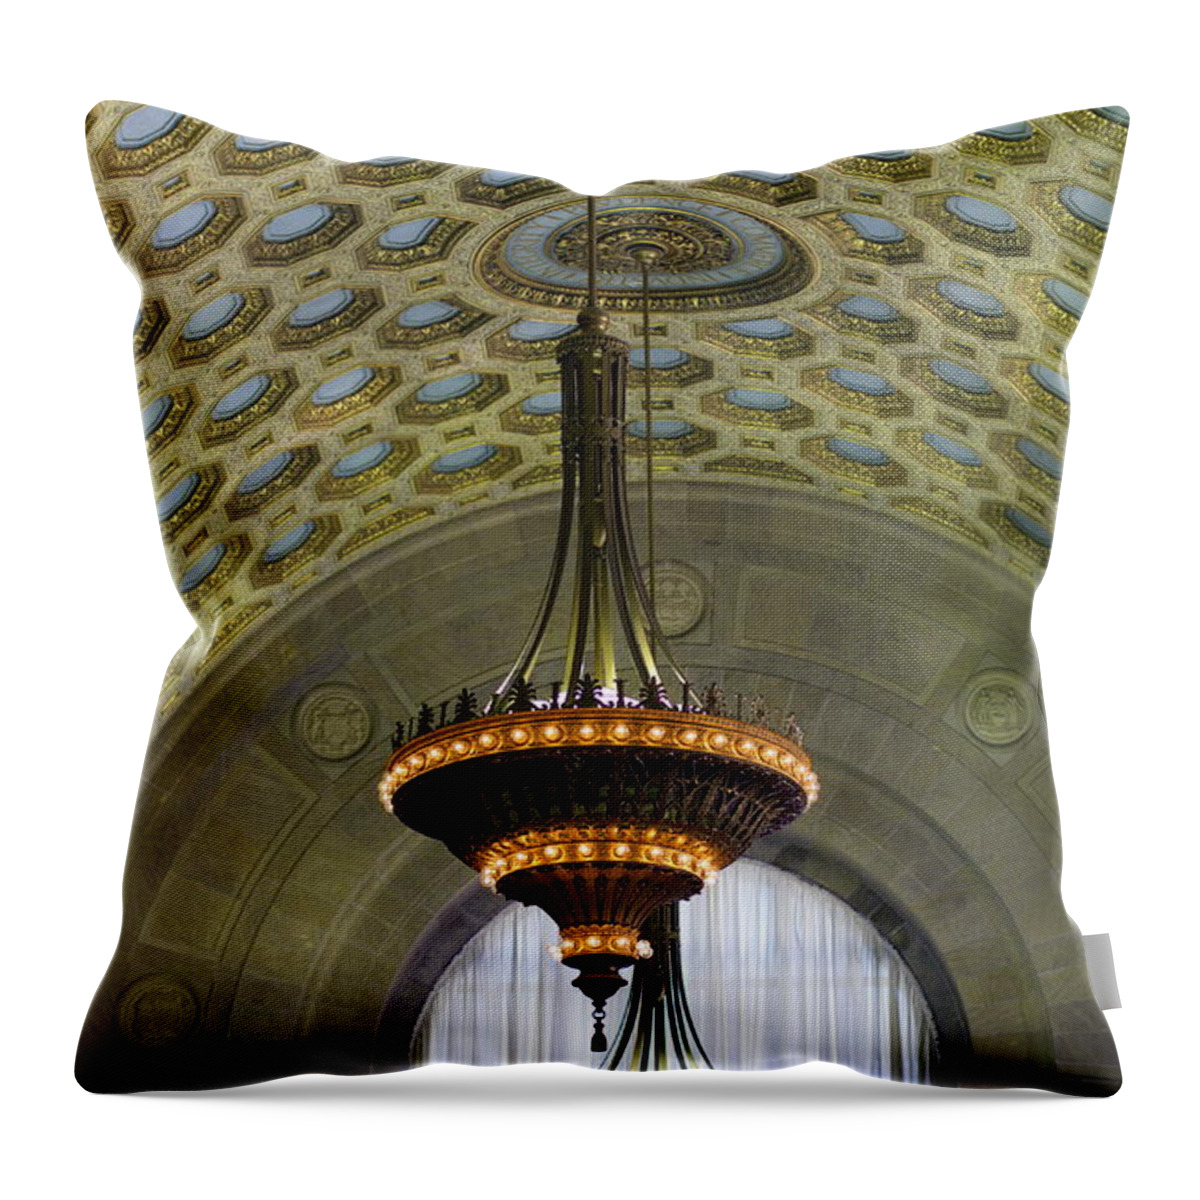 Tofd Throw Pillow featuring the photograph Commerce Court North Ceiling by Nicky Jameson